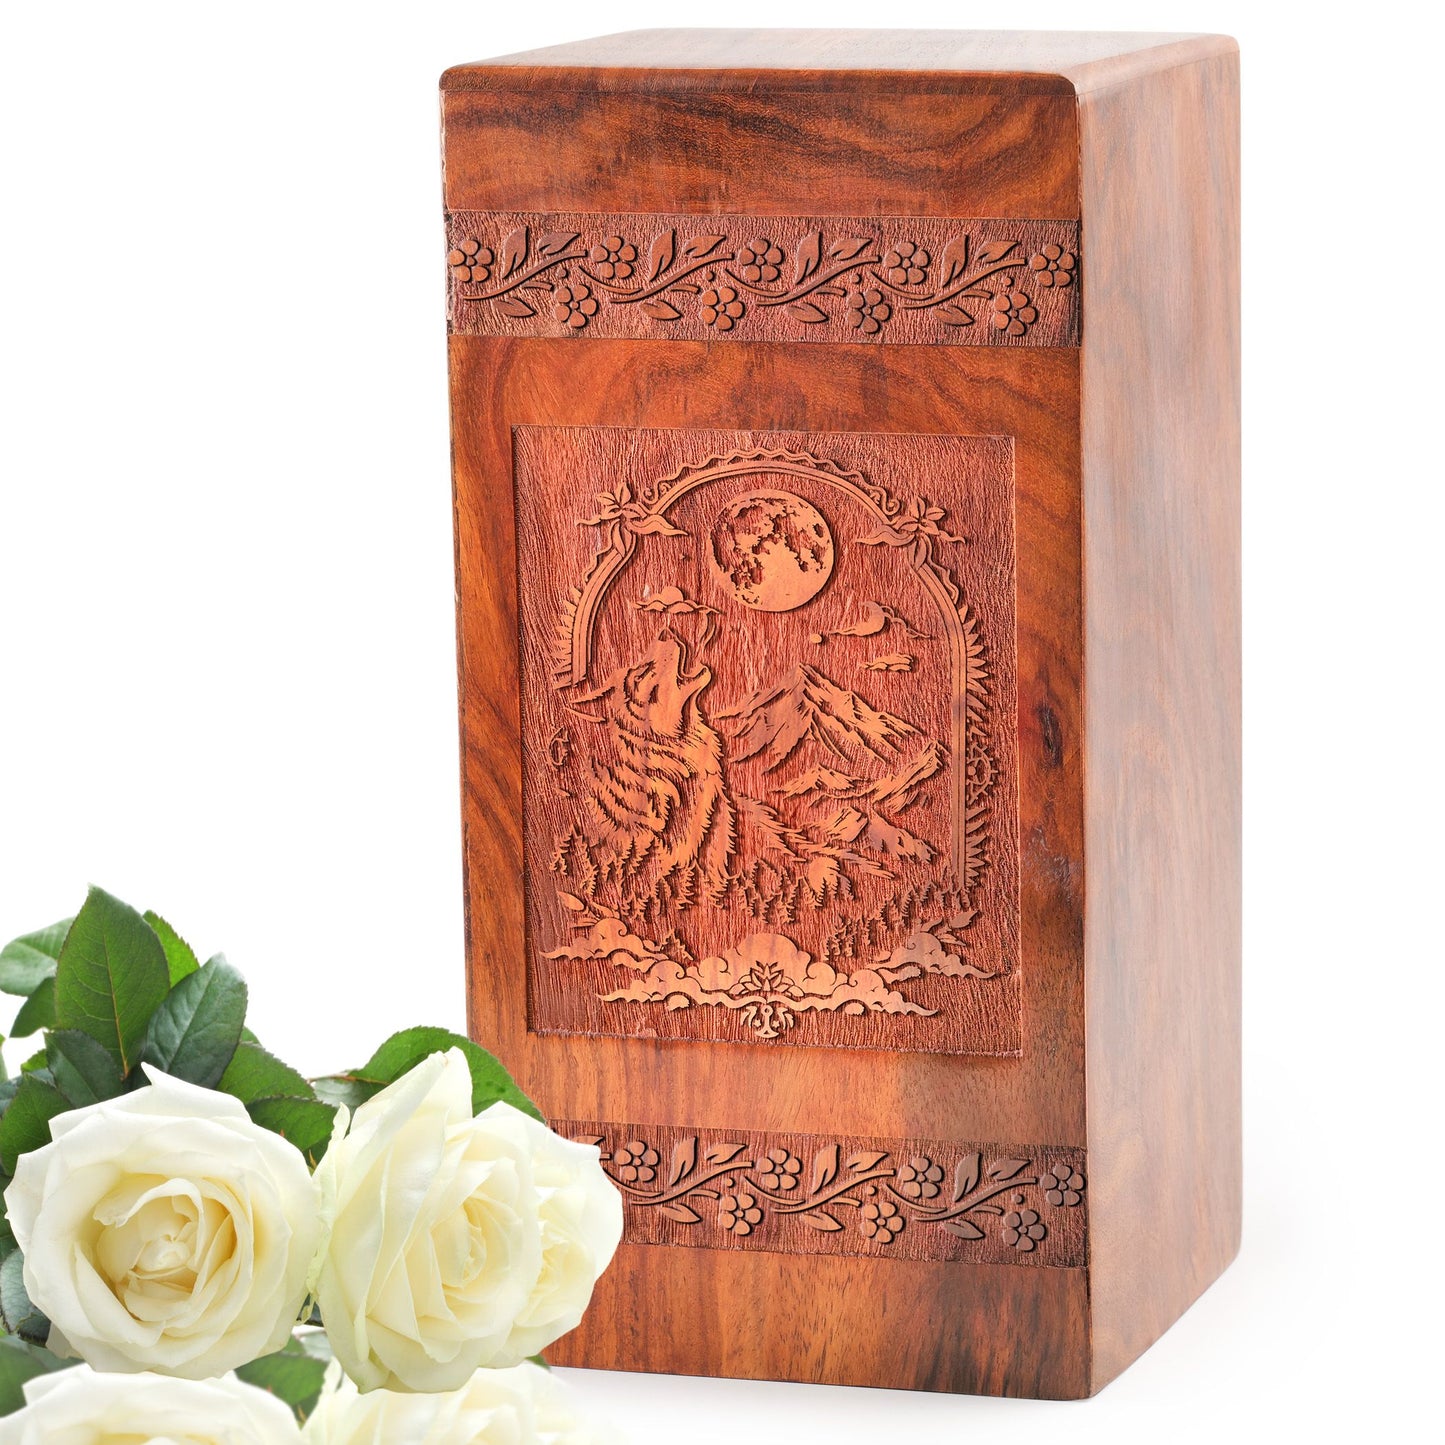 Large wolf-themed wooden urn, memorial urns for male burial, wooden cremation ashes box for funeral